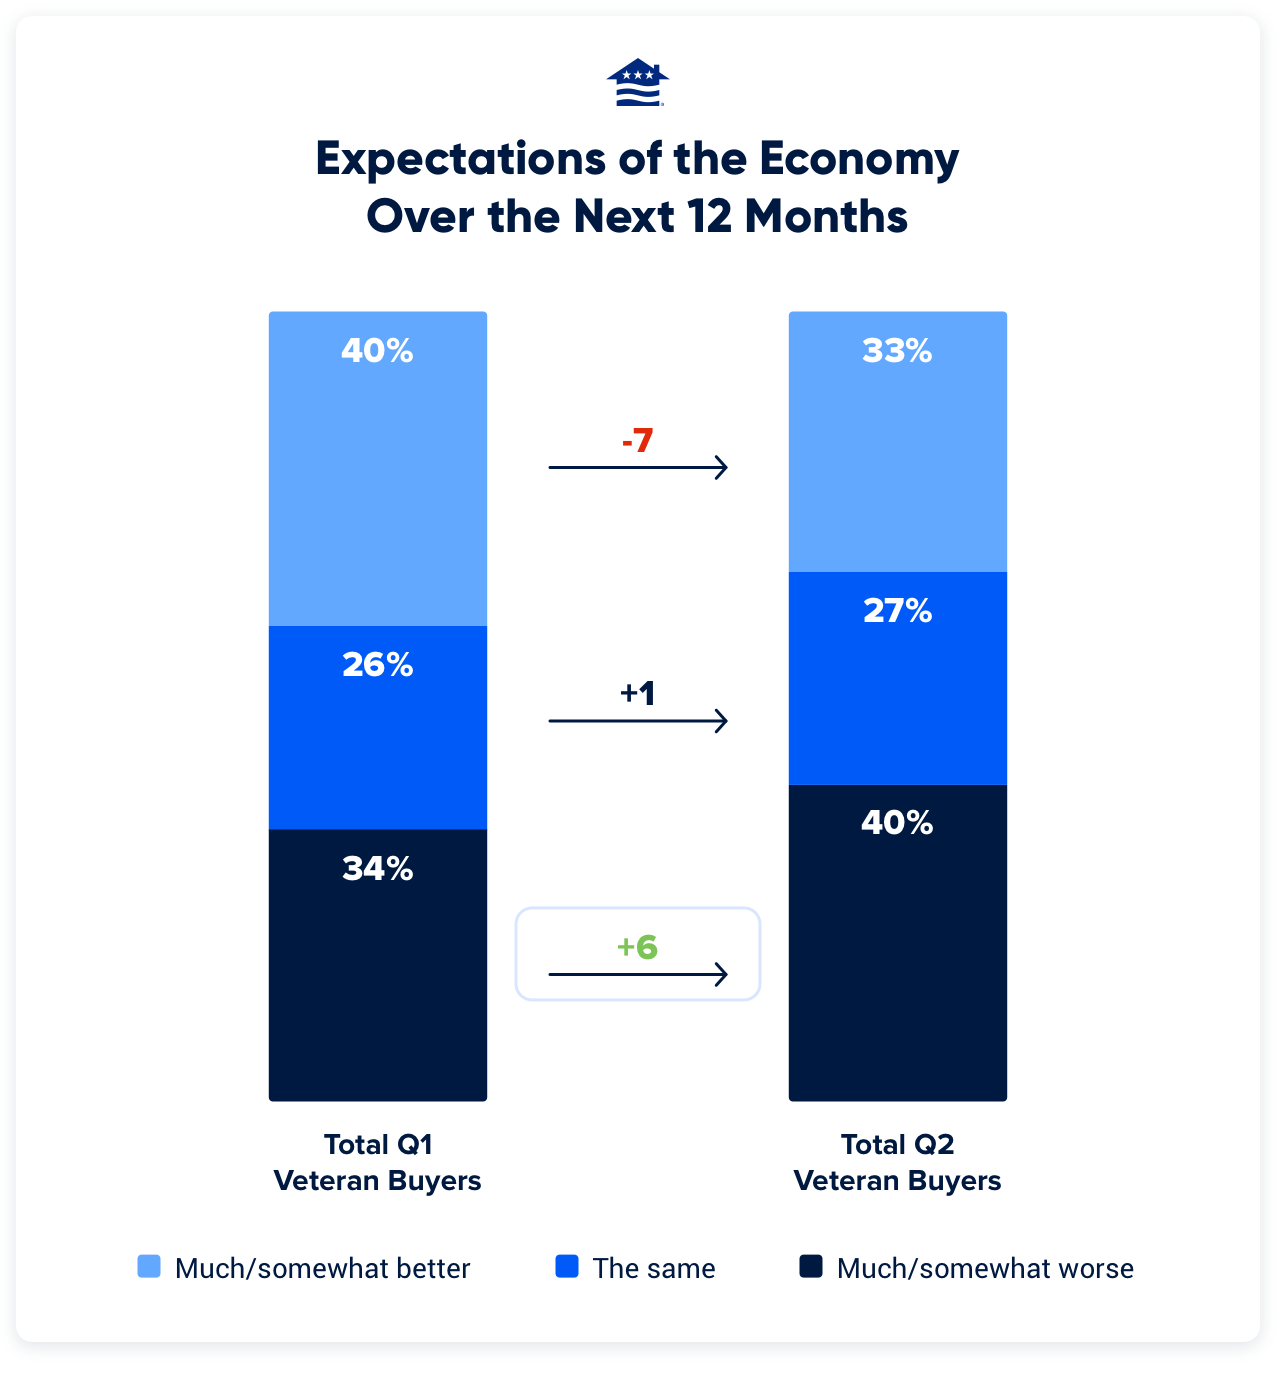 This chart shows that, compared to the first quarter of this year, more Veterans think the economy will get worse over the next year, while fewer expect it to get better.